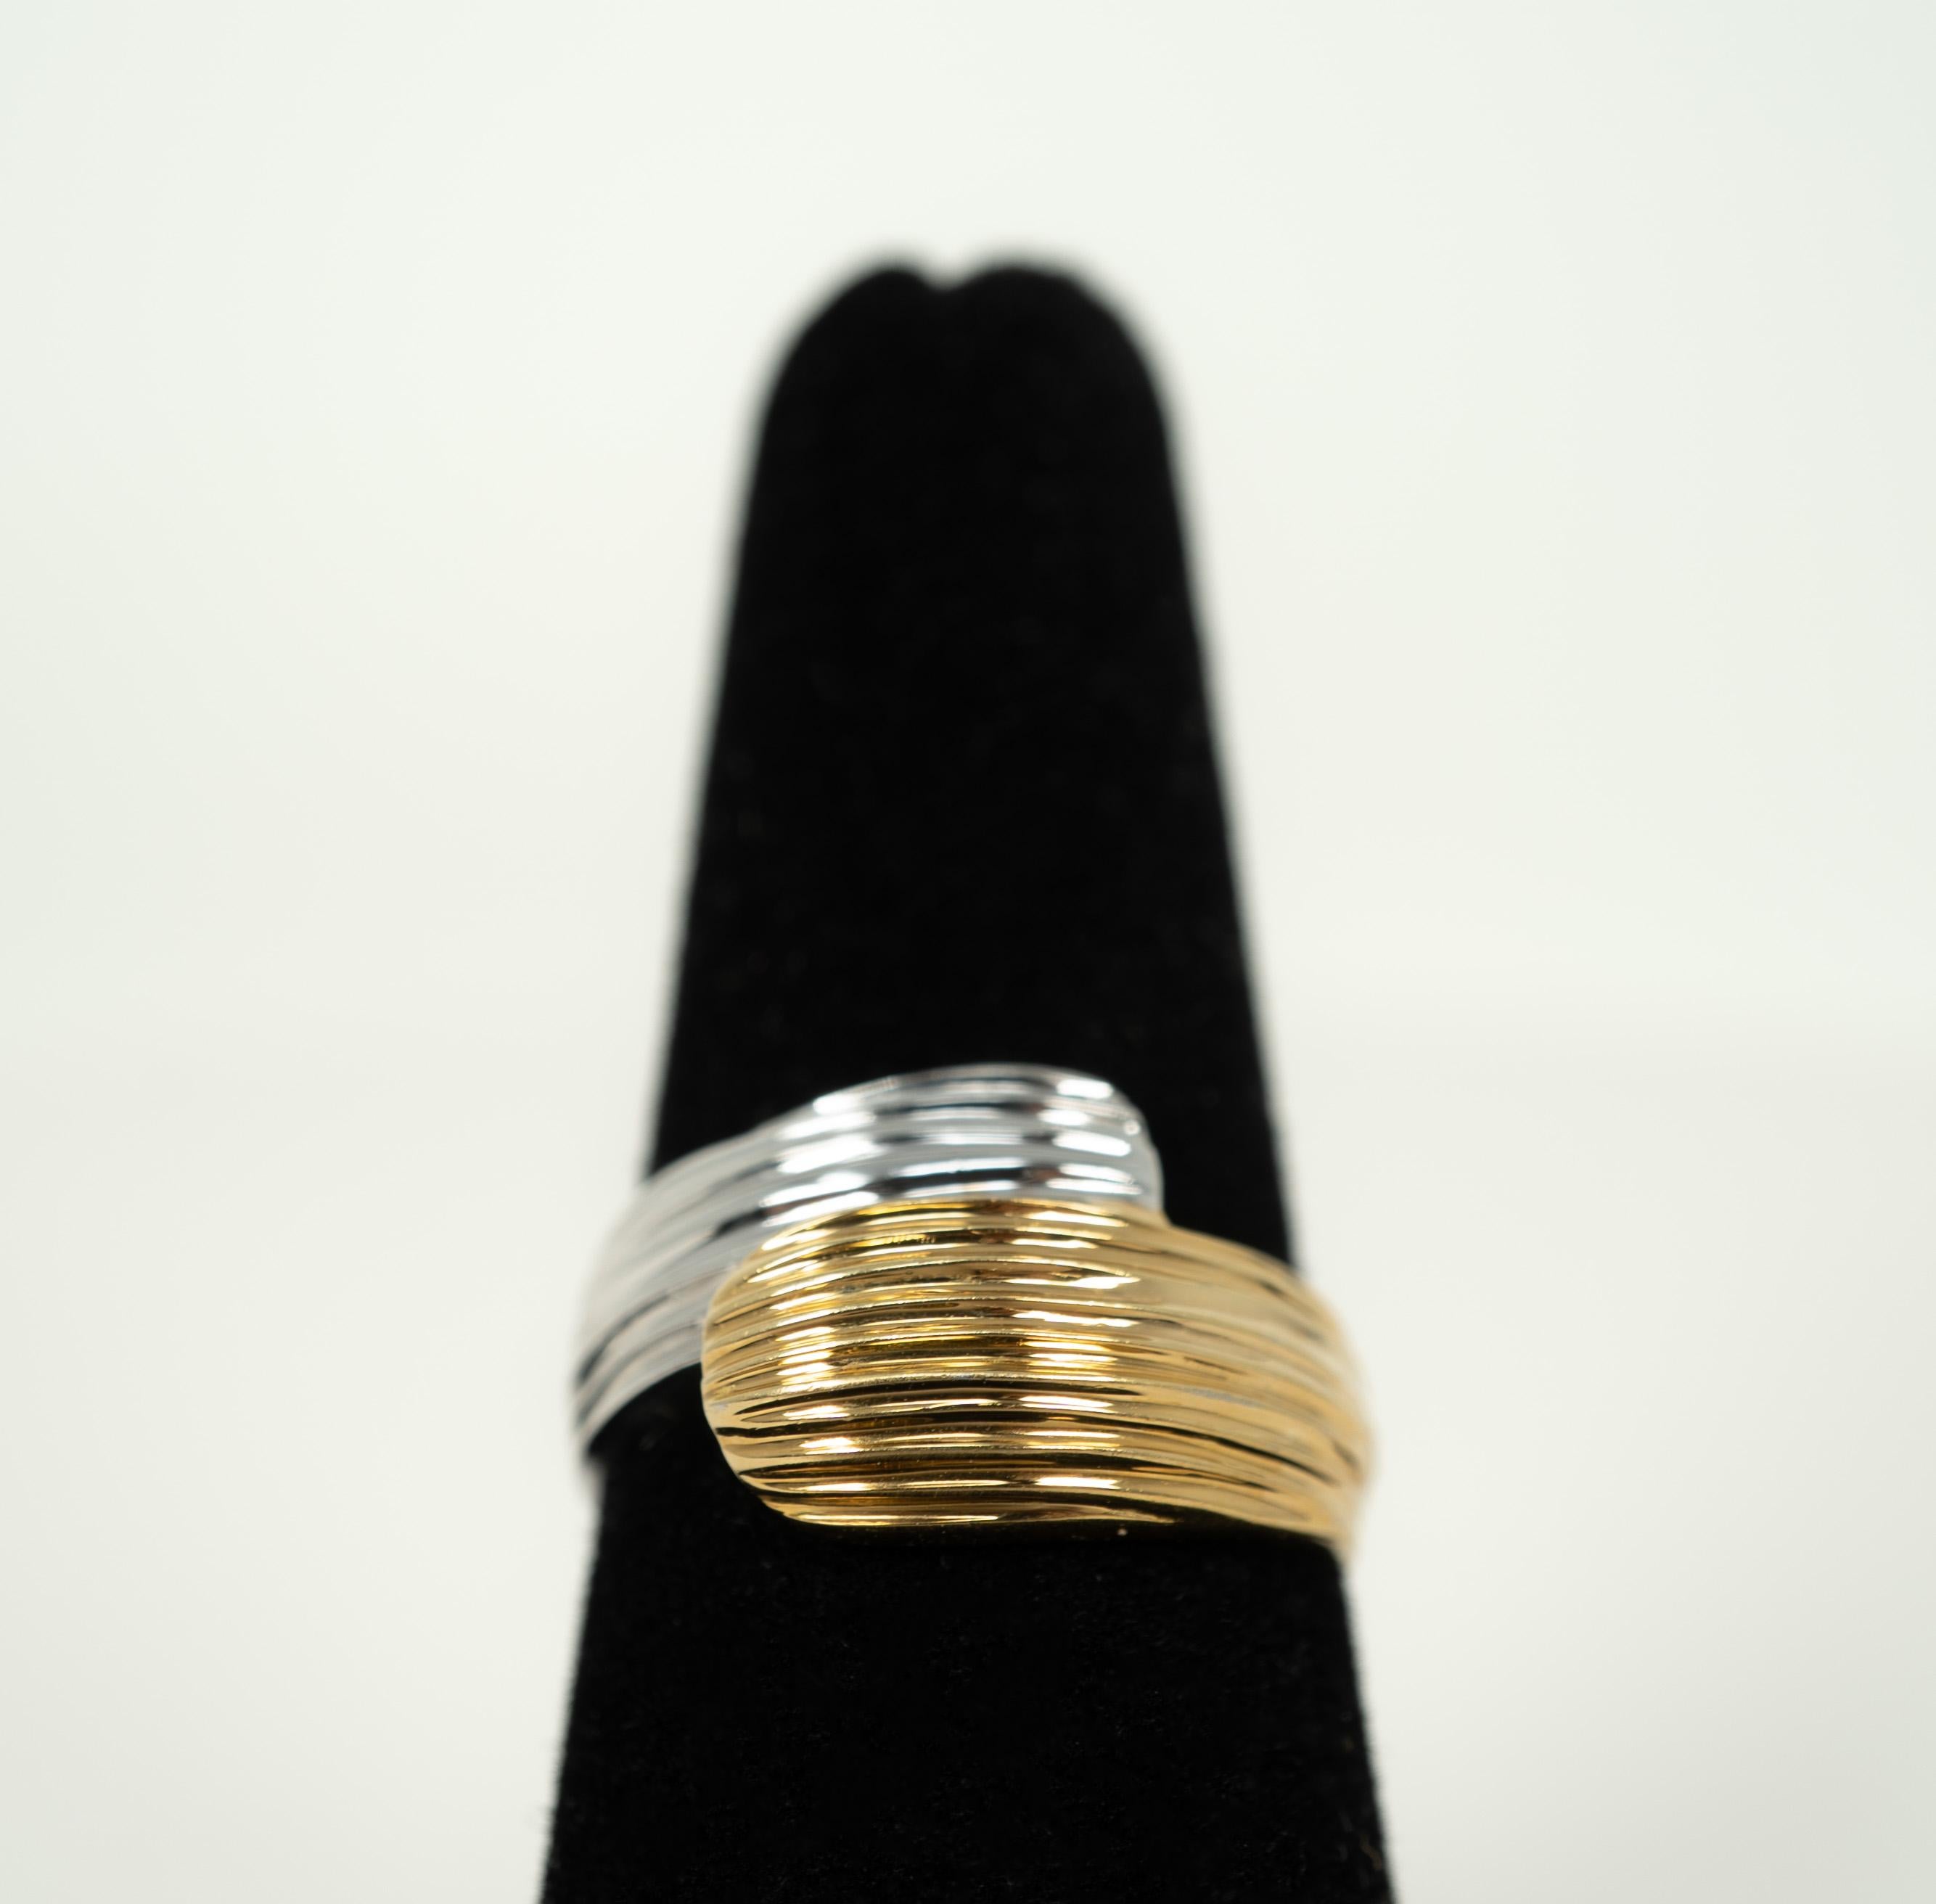 In fluted 18 karat yellow and white gold, this fun bypass ring is a great addition to any collection!